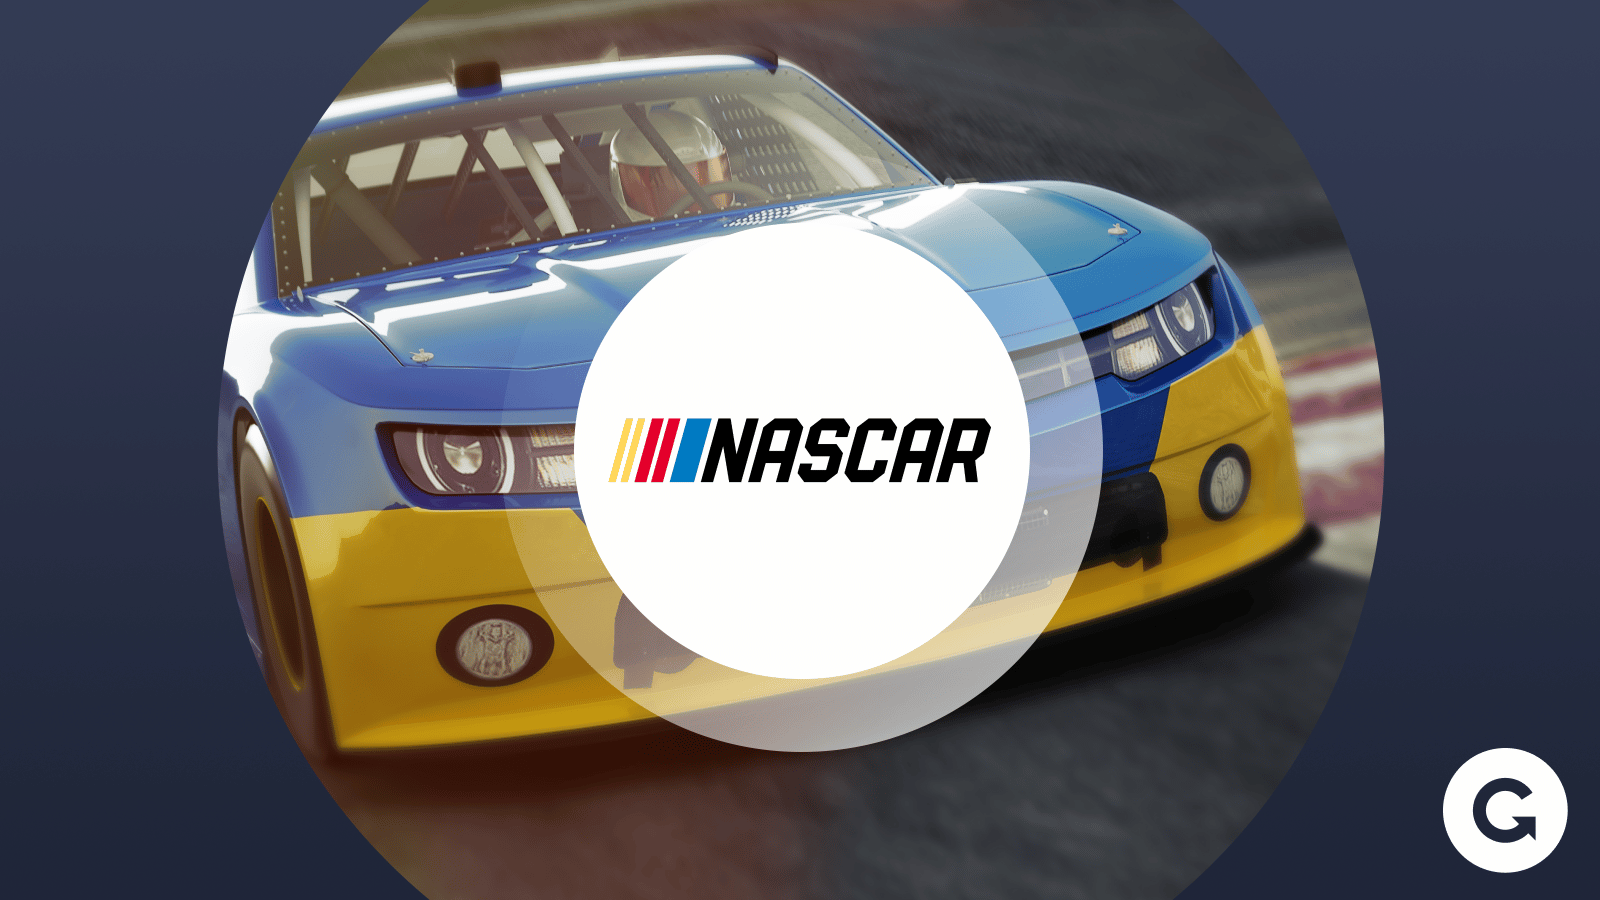 Nascar partners with Grabyo to enhance digital content capabilities